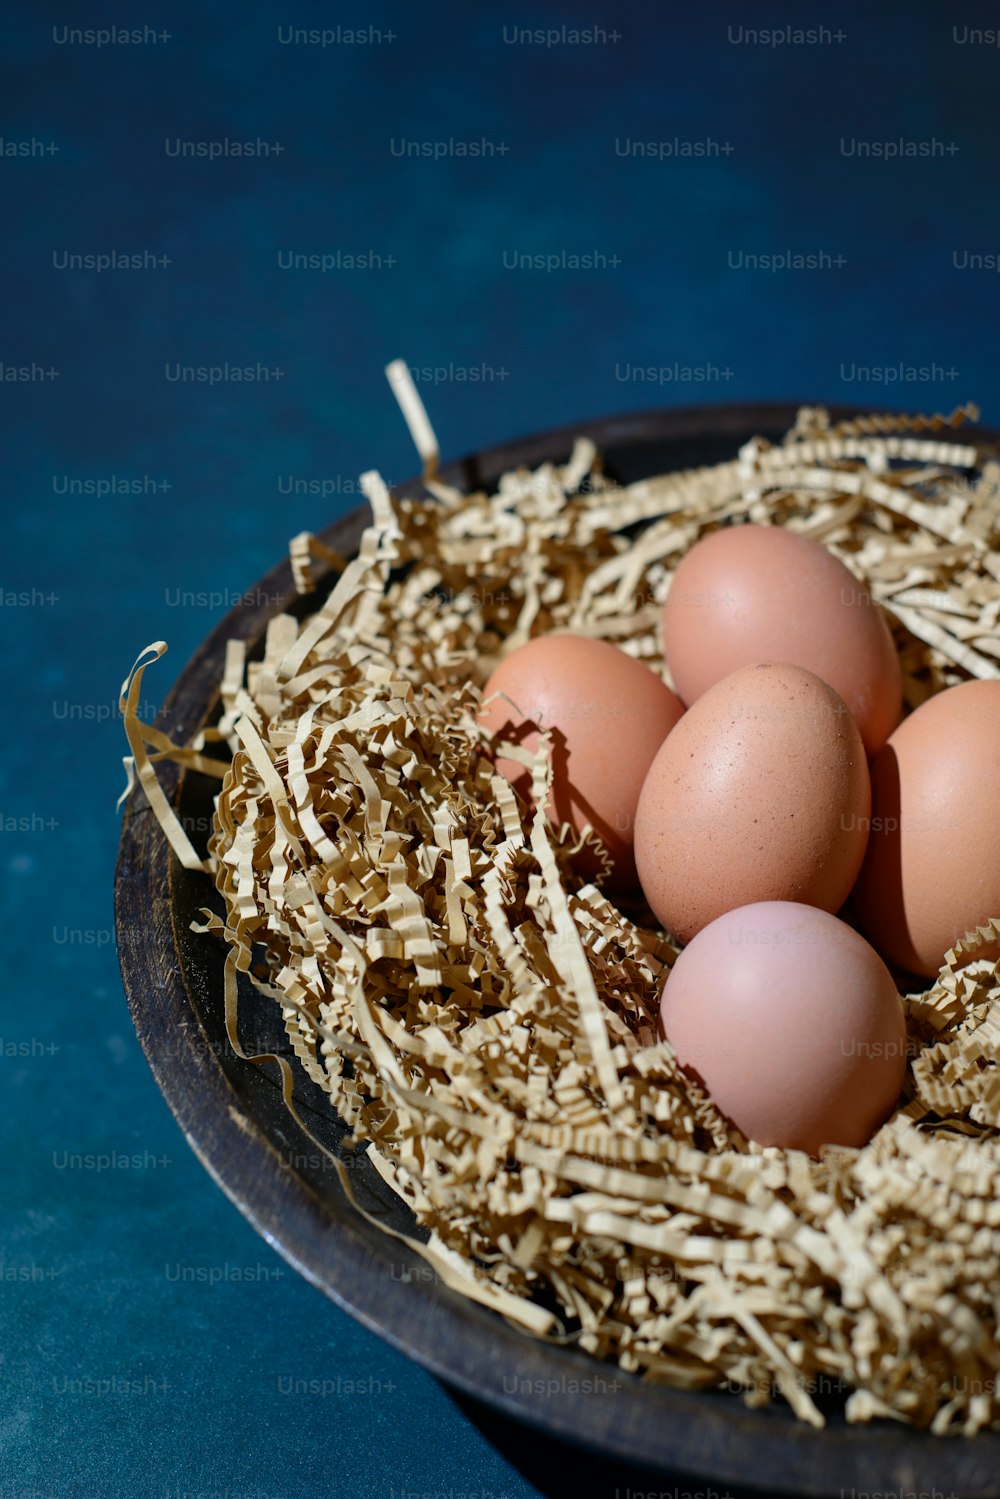 four eggs in a nest of hay on a table